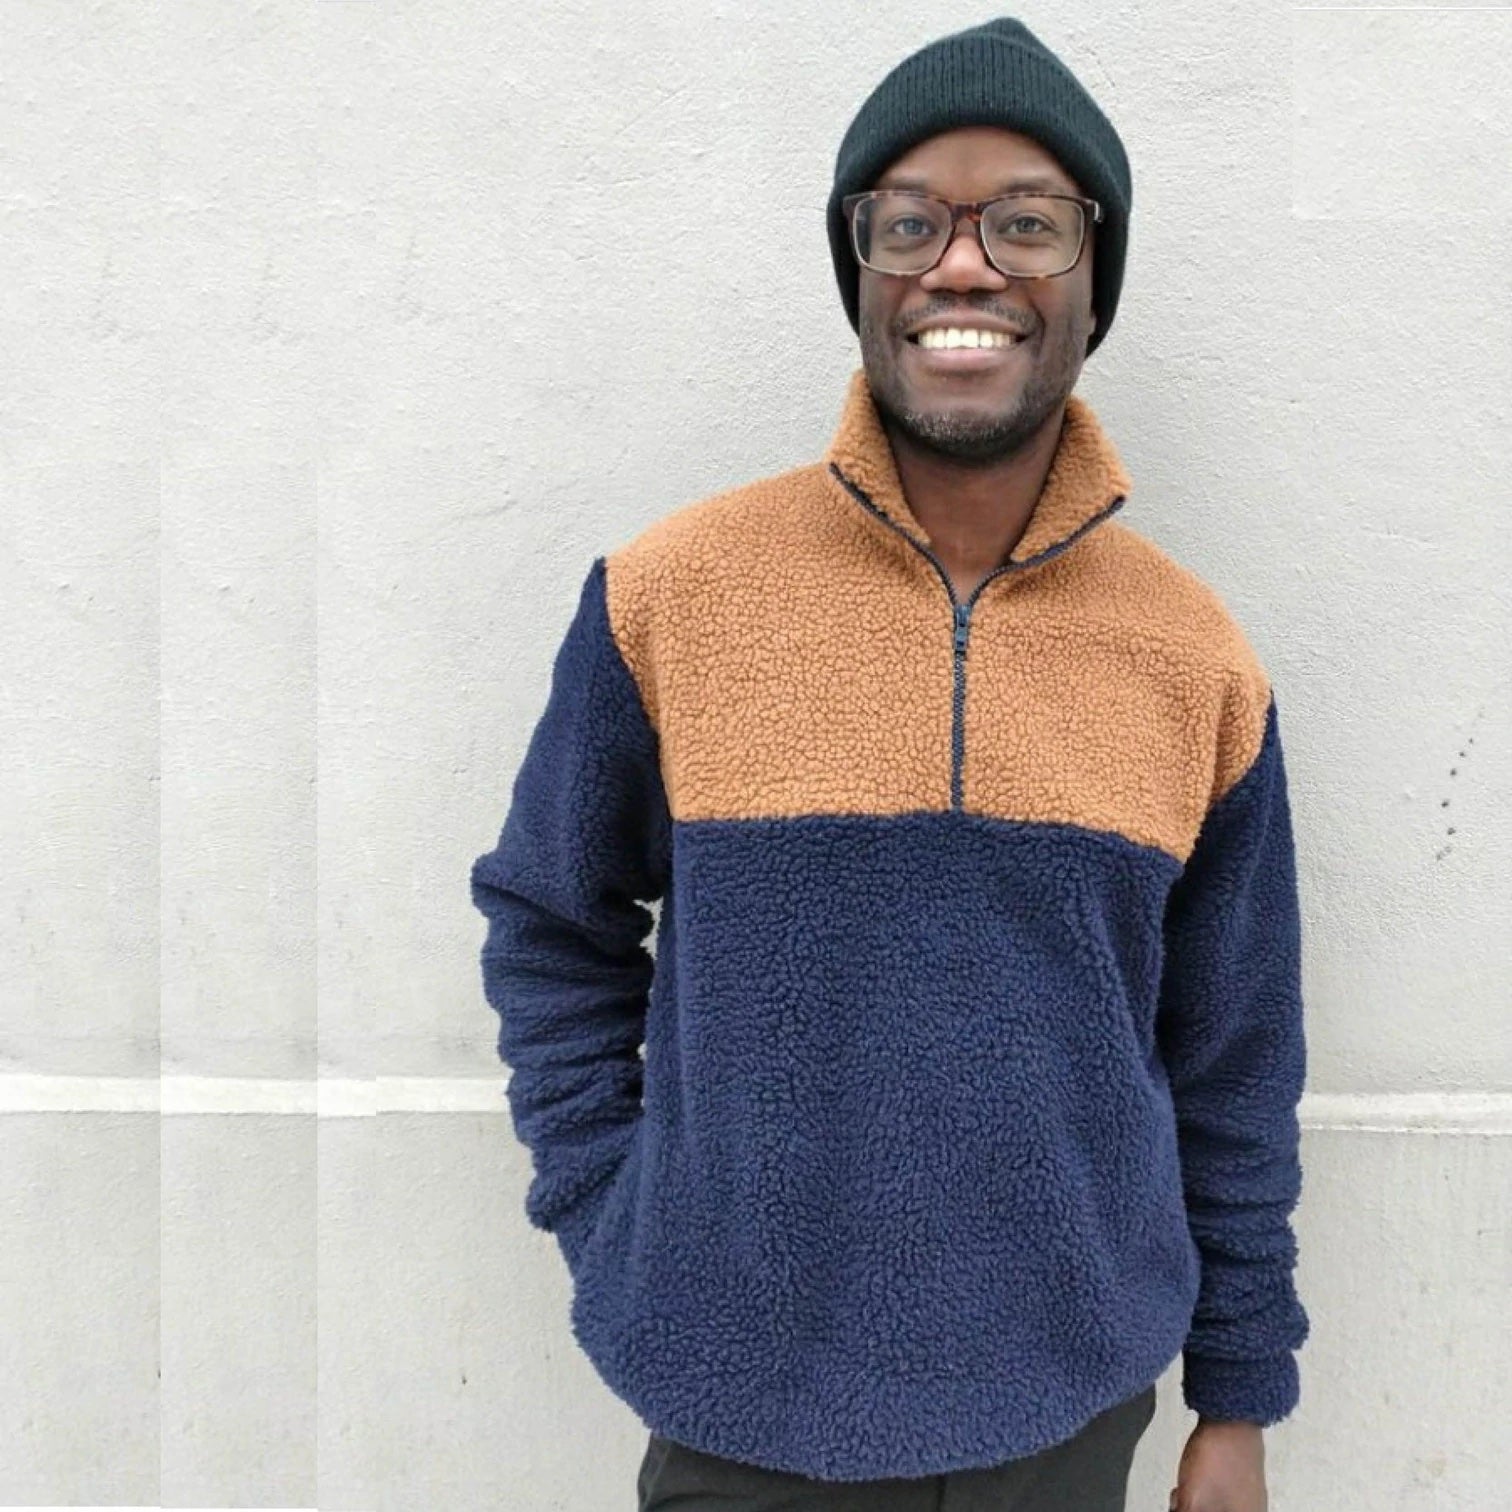 Man wearing the Men's Zip-up Sweater sewing pattern from Wardrobe by Me on The Fold Line. A sweater pattern made in fleece, French terry or fluffy teddy fleece fabrics, featuring a zipper from the neck to the chest, roomy fit, dropped shoulders, side pock